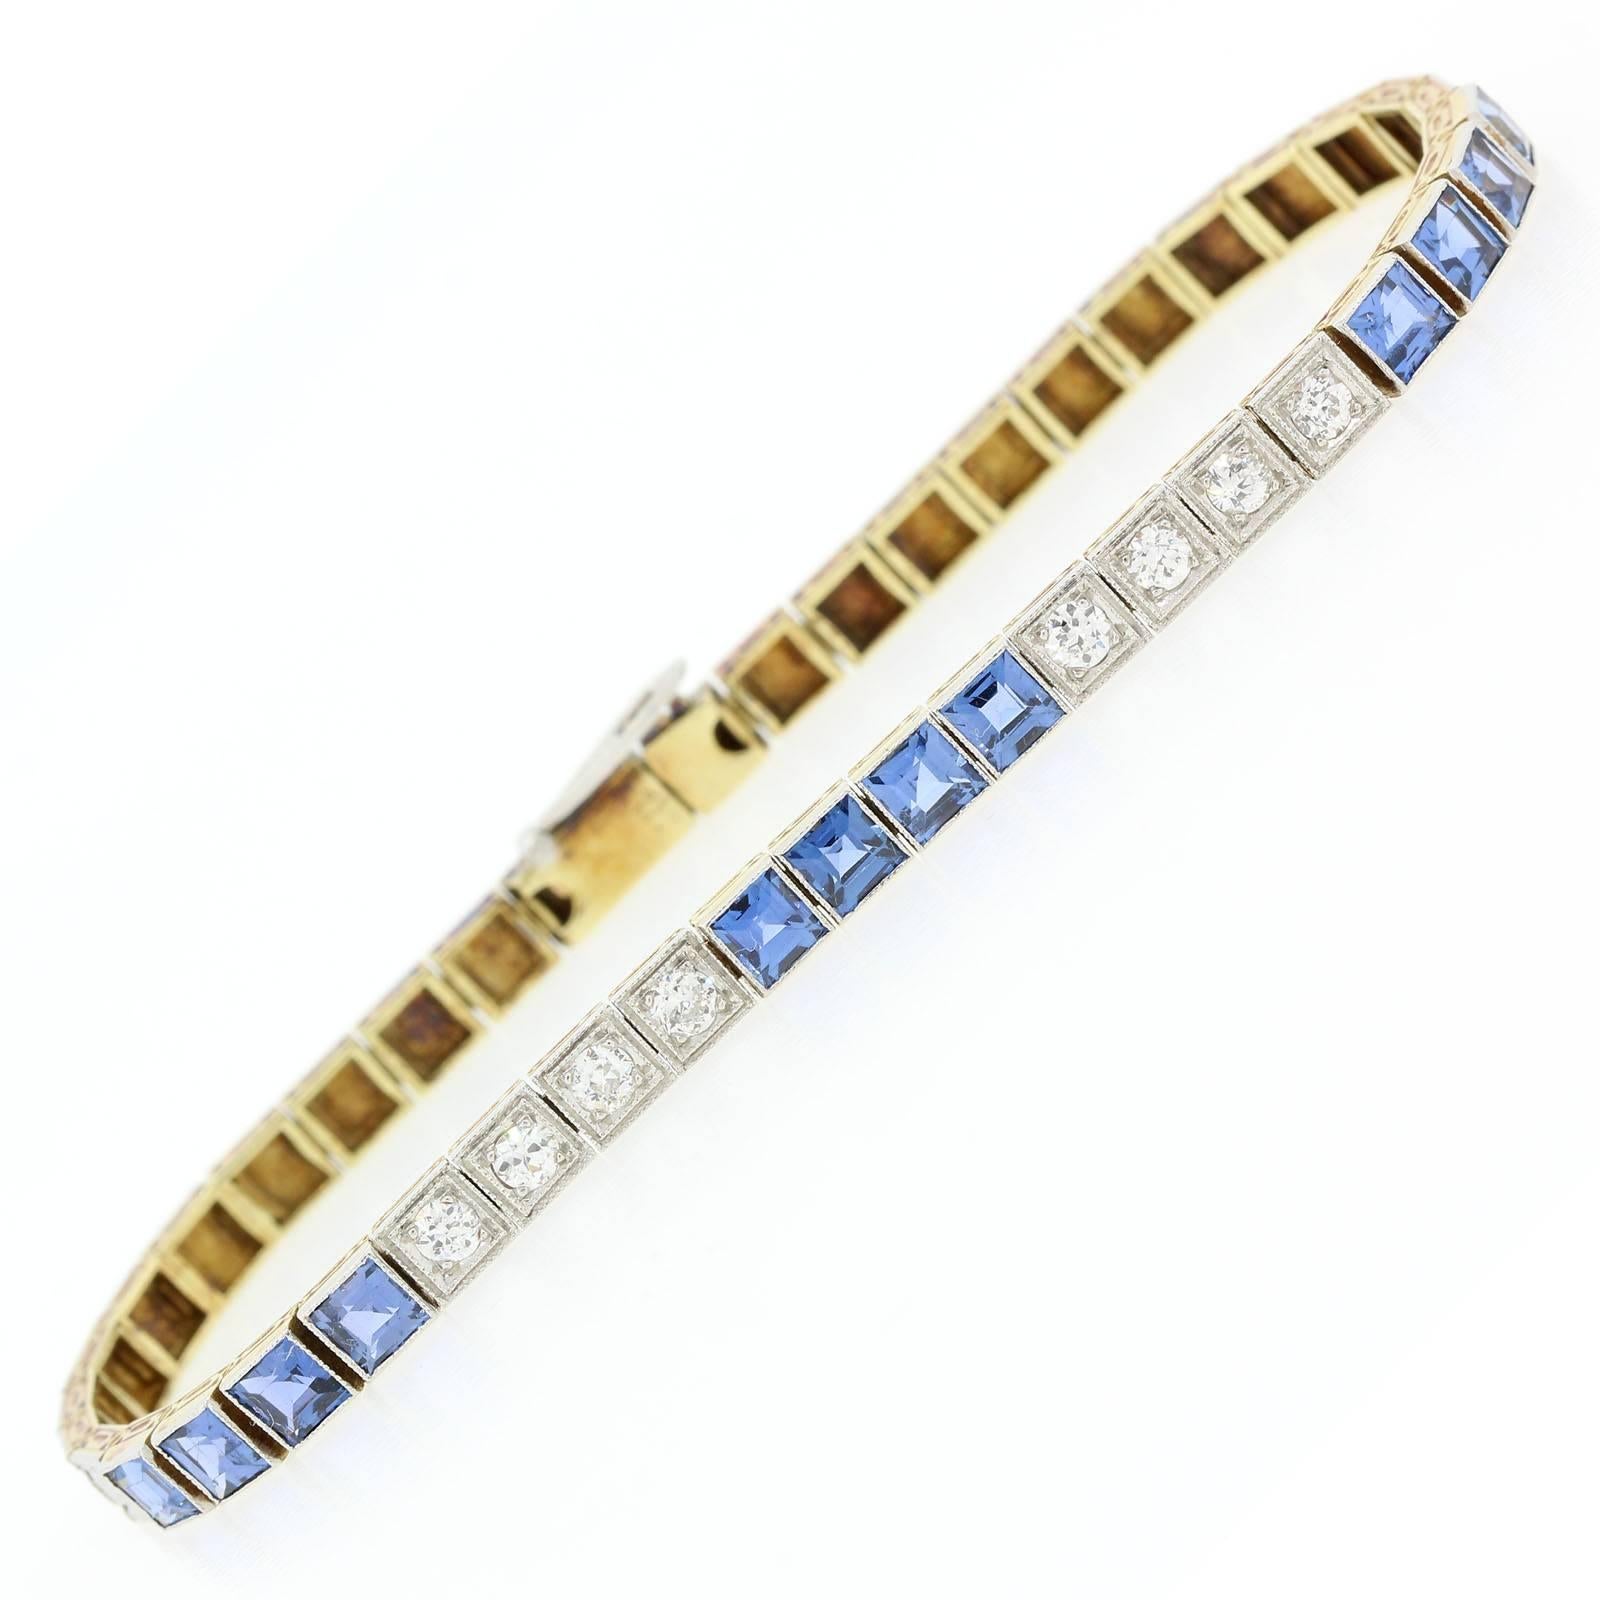 A beautiful 1920s straight line platinum topped 14KT yellow gold bracelet.  The bracelet has three sections of square cut Montana Sapphires alternating with two sections of four European Cut Diamonds.  The Sapphires weigh a total of approx. 3.10